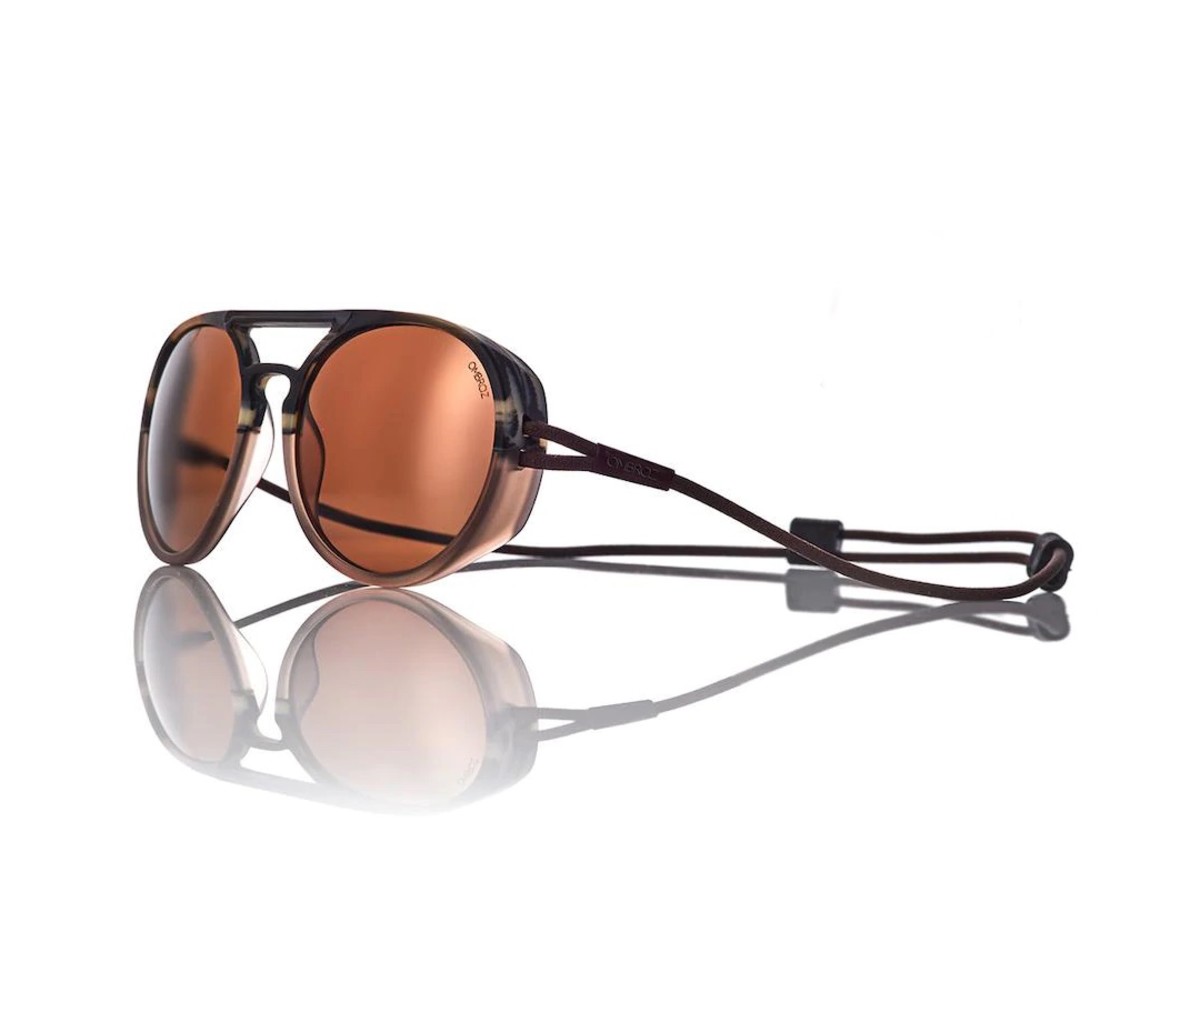 The unique Ombraz sunglasses eschew temples for tight-fitting bungee cord.